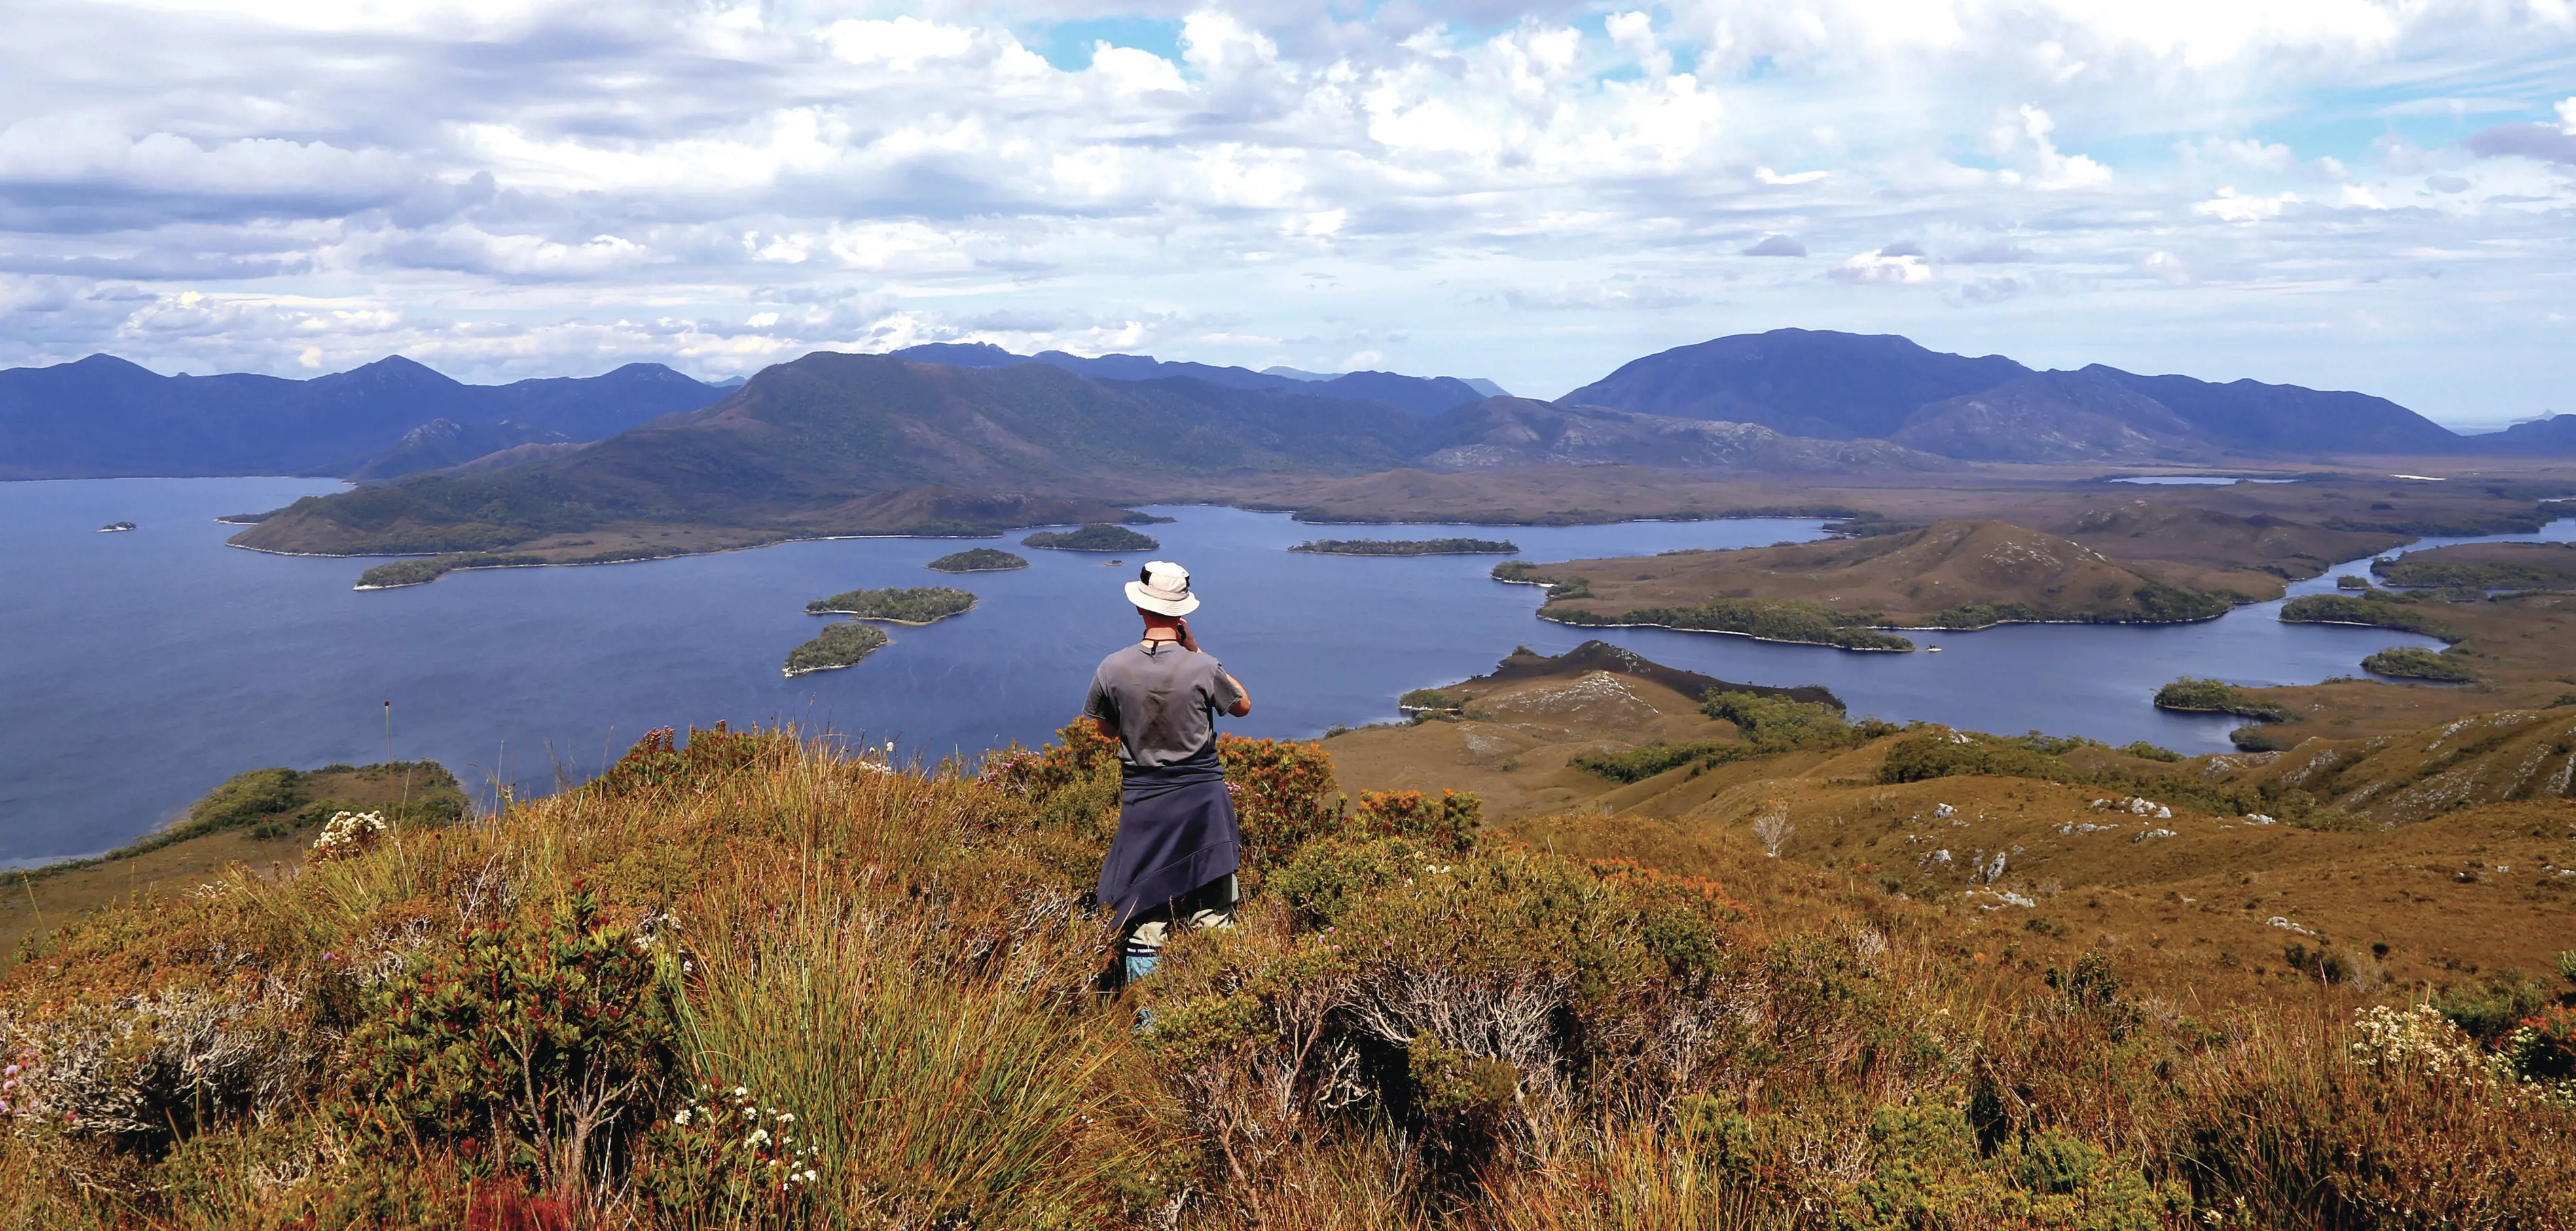 "Person at a peak of a mountain, exploring the incredibly remote waterways and wilderness of Bathurst Harbour/ Port Davey. "